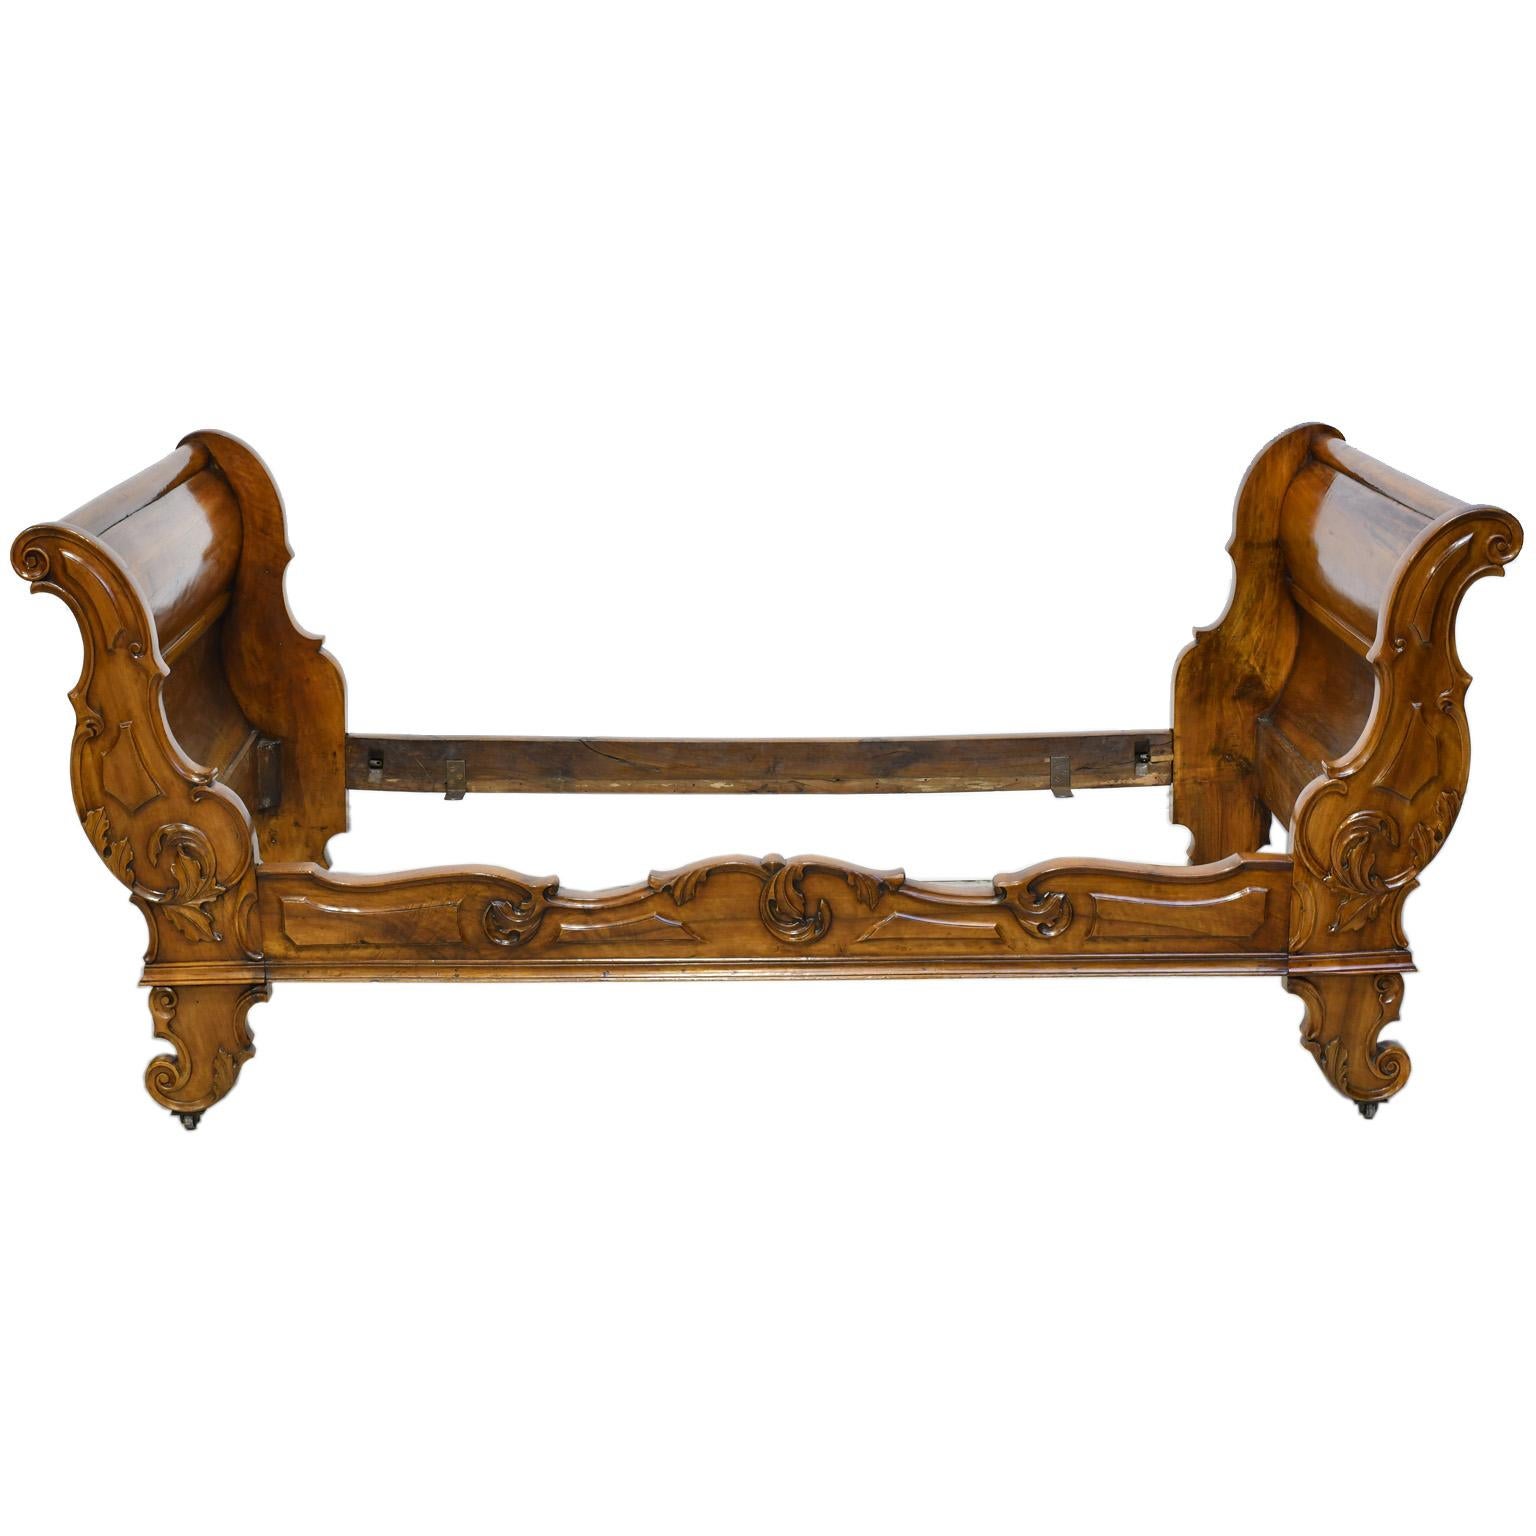 Exceptional French sleigh bed in solid French walnut, circa 1840. There are no appliqué's, headboard, footboard and side rail are carved from solid walnut. Carvings are well articulated, lively and expressive. Bed has been restored in our workshop